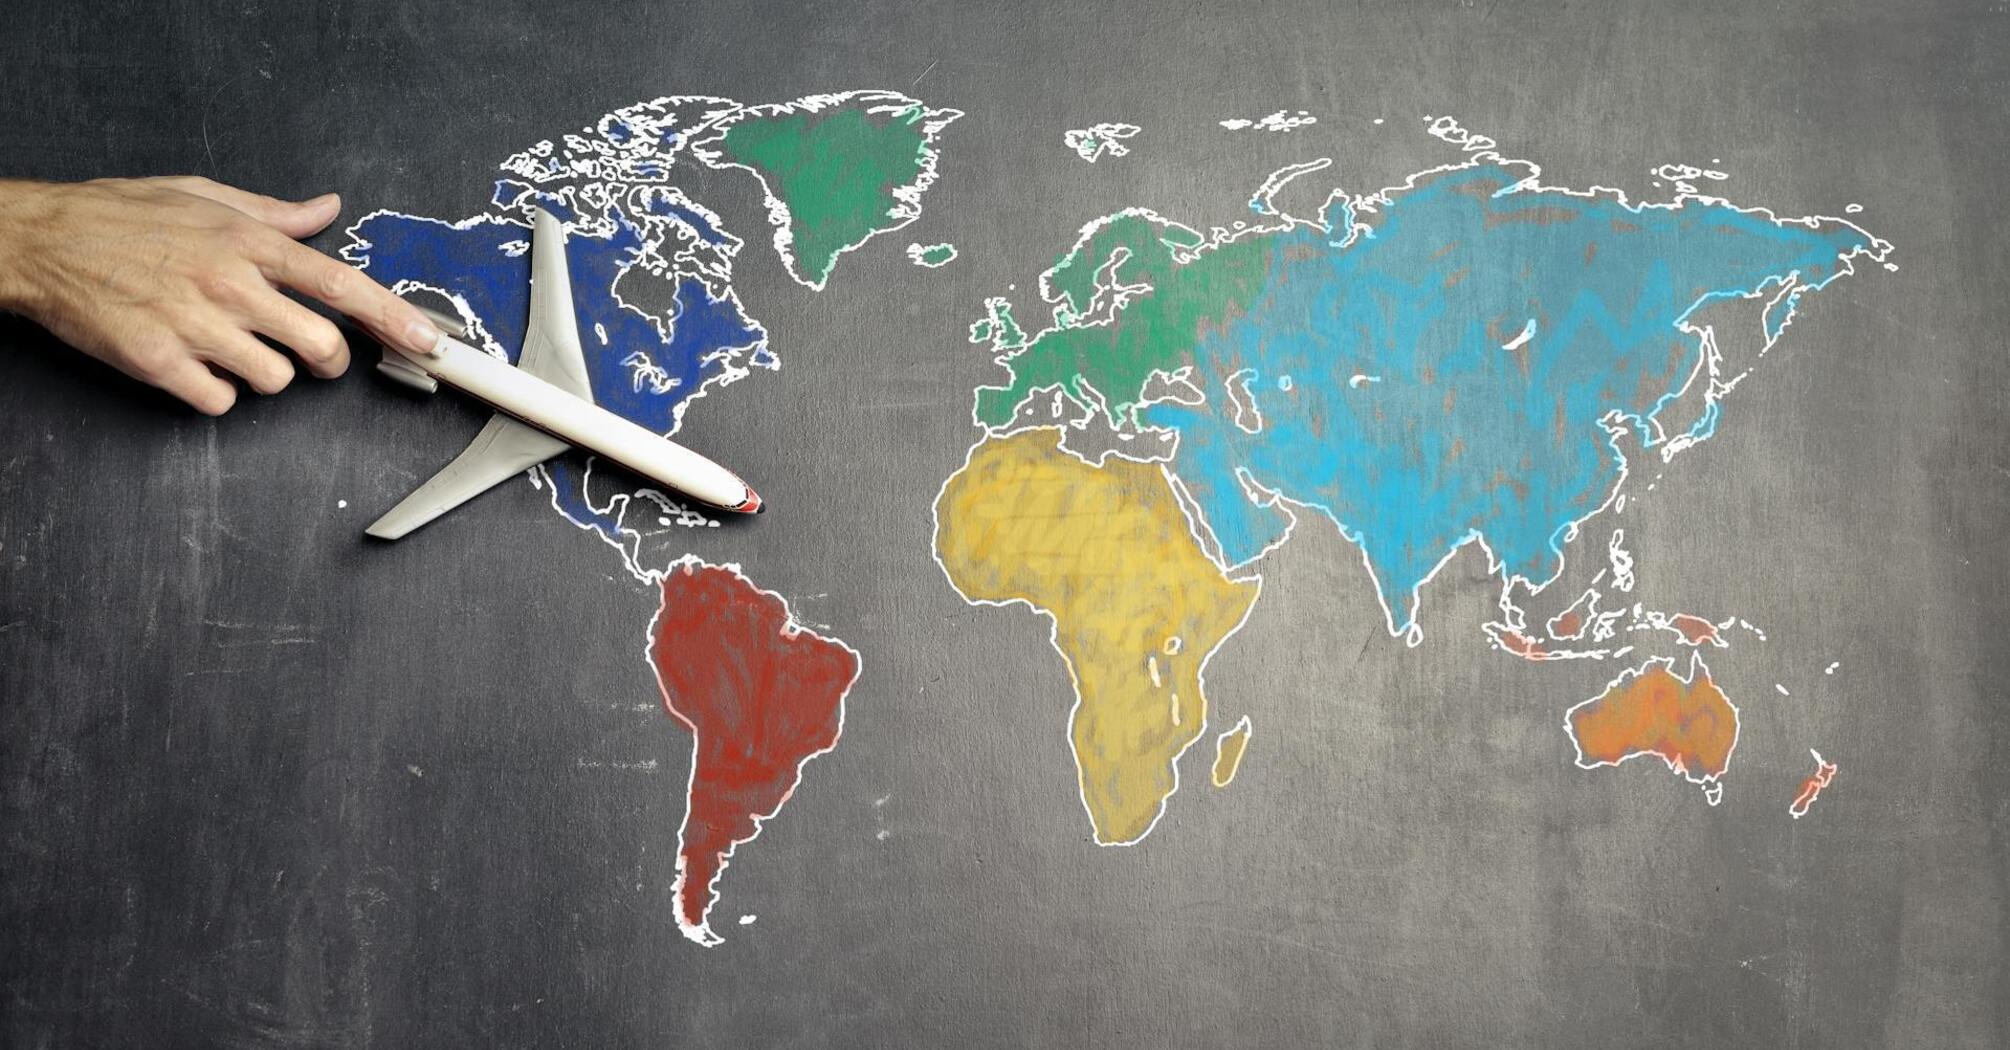 Toy airplane over a chalk-drawn world map